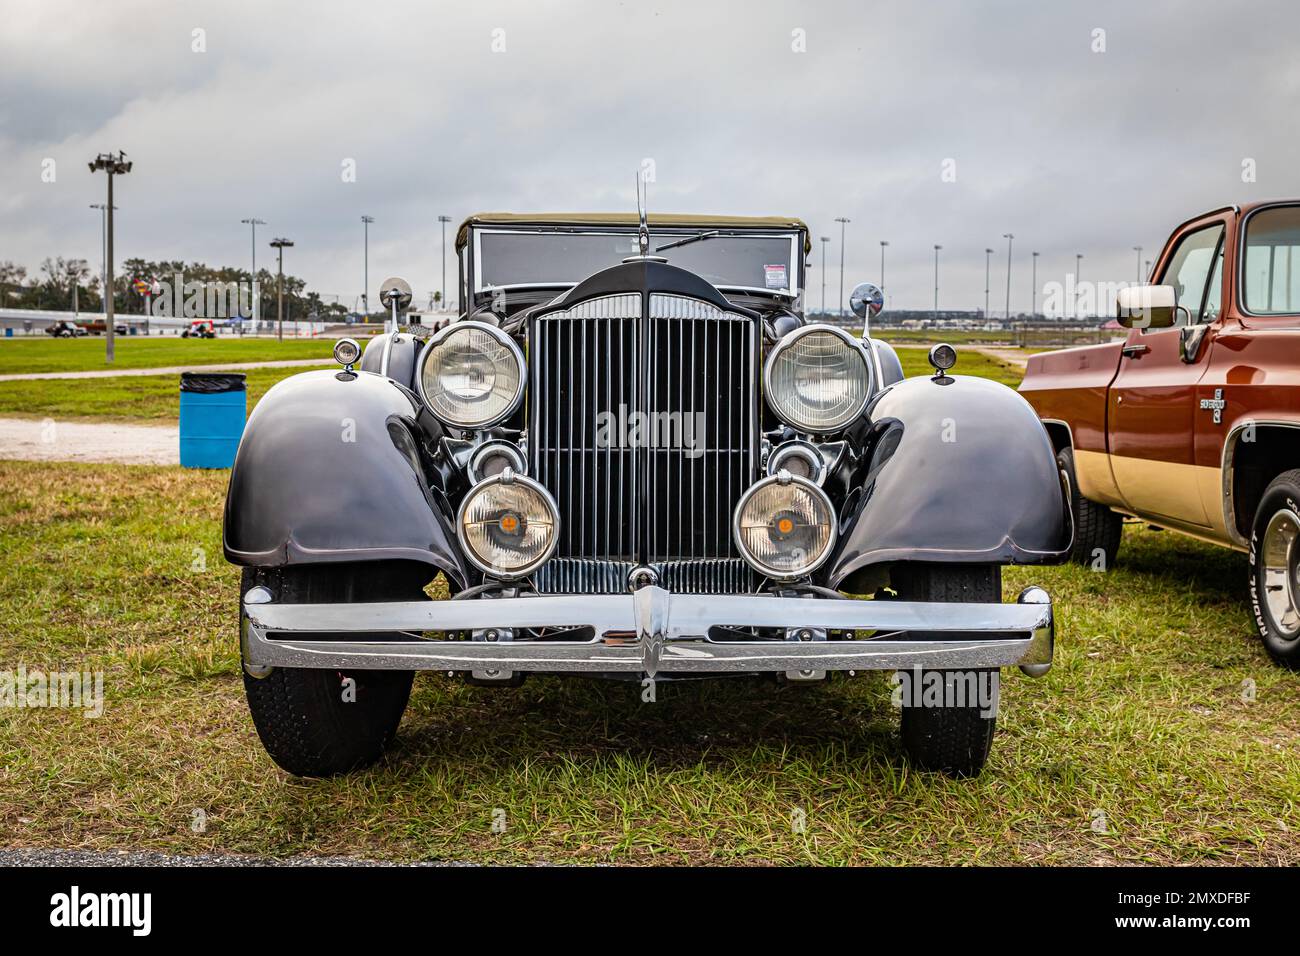 Daytona Beach, FL - November 26, 2022: Low perspective front view of a 1934 Packard Super Eight Convertible Sedan at a local car show. Stock Photo